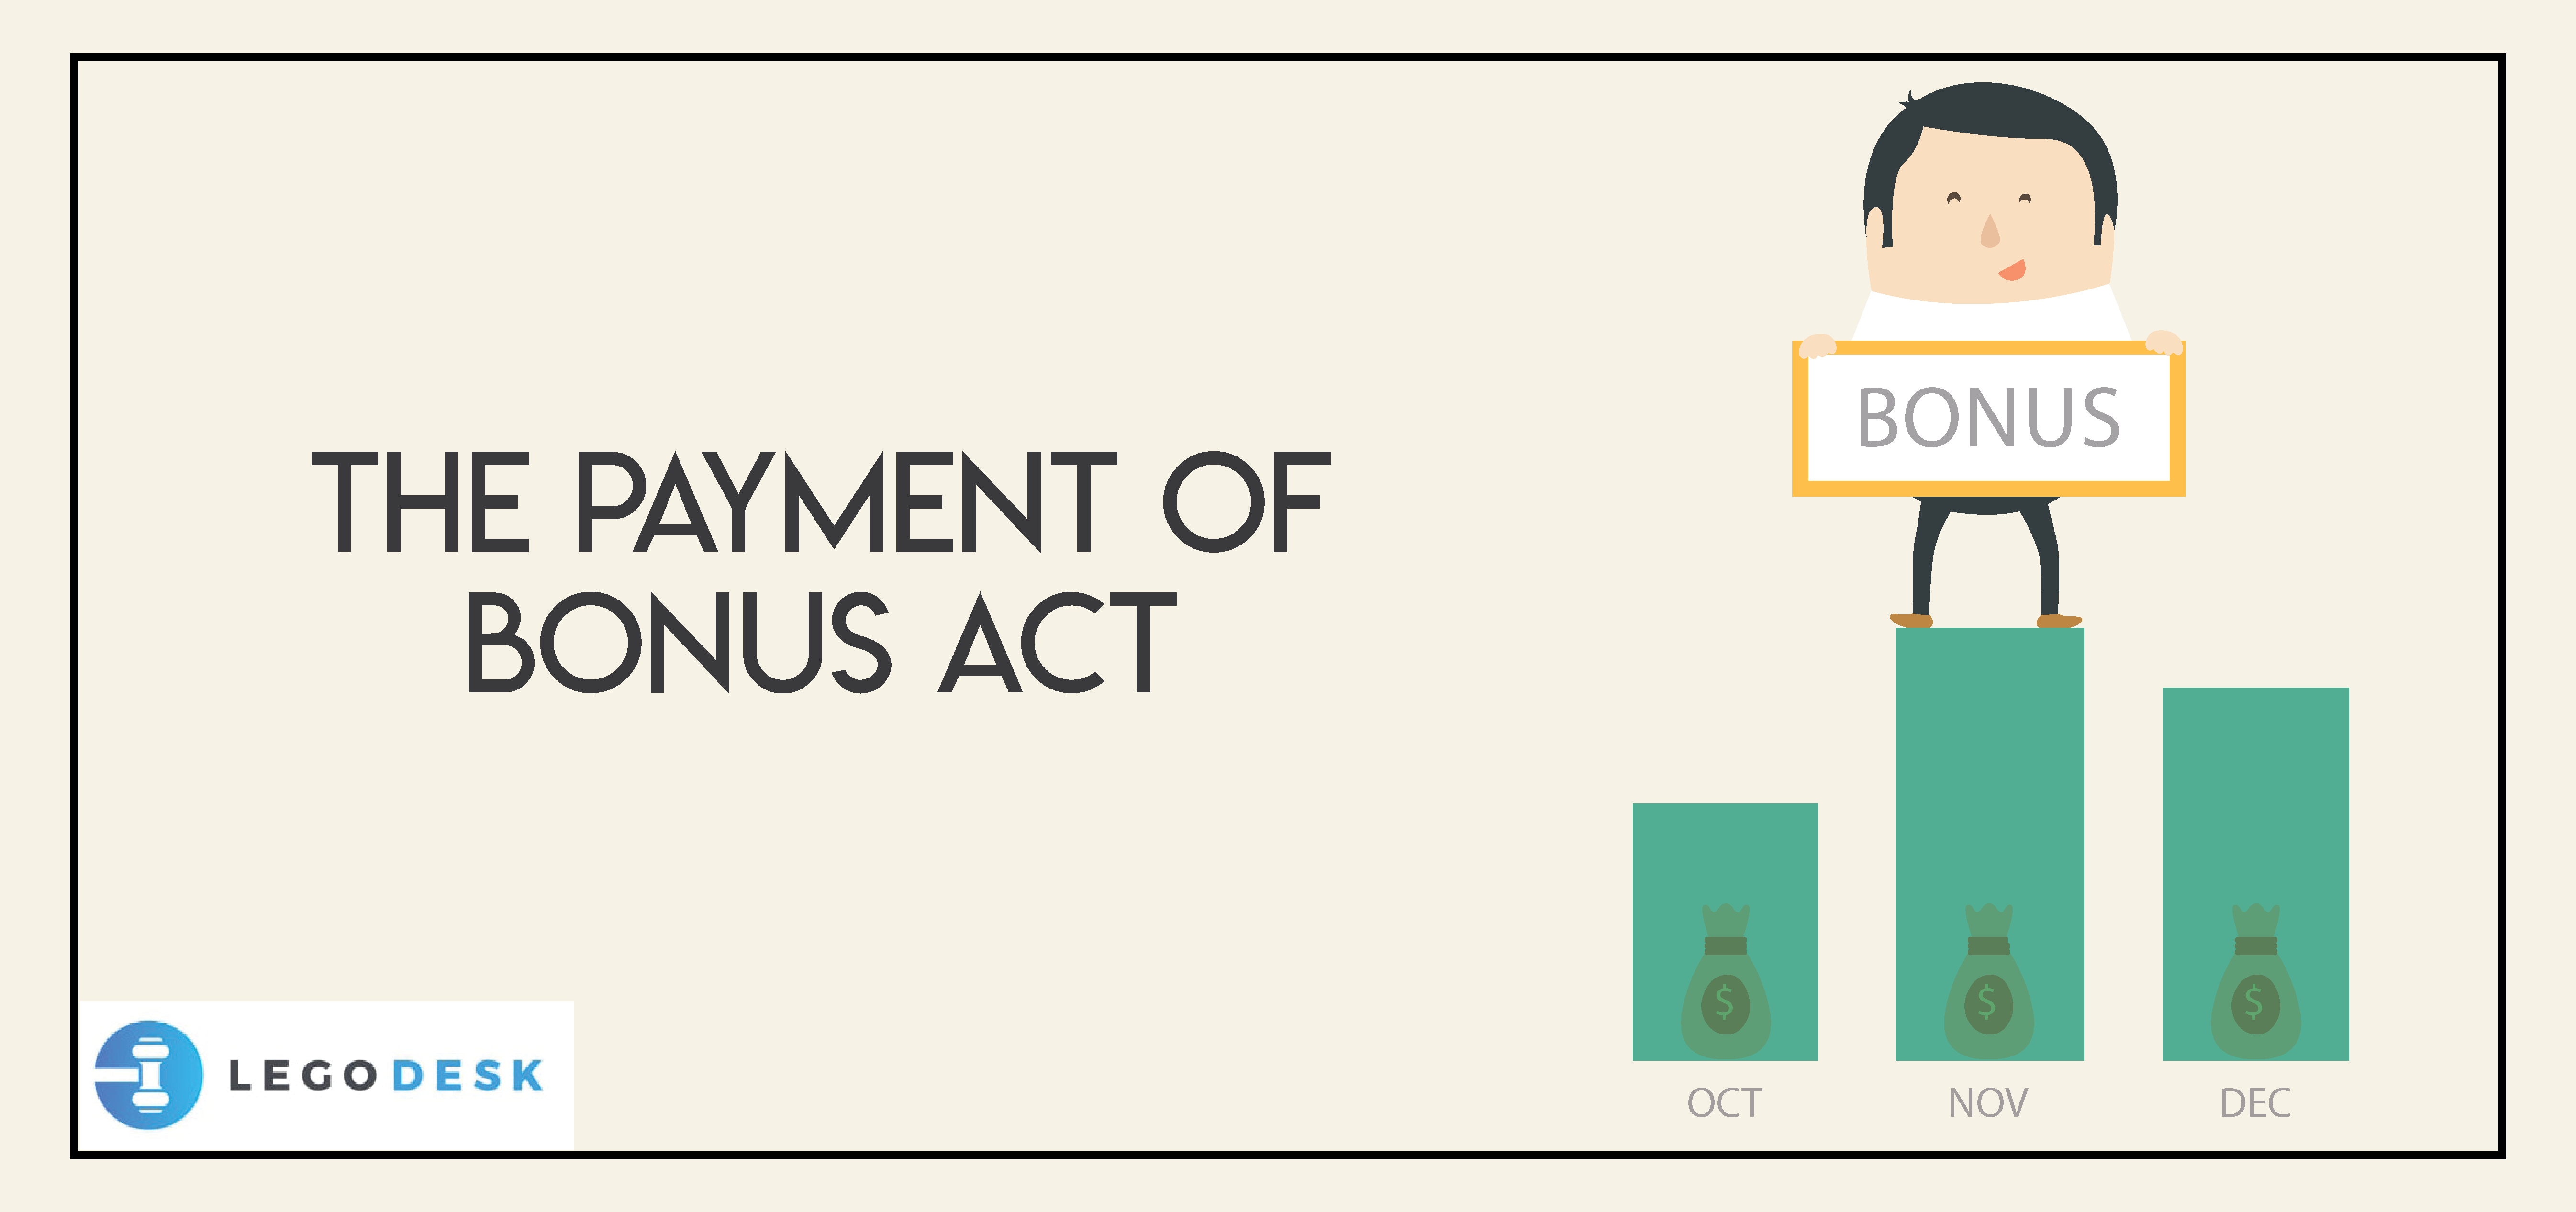 The Payment of Bonus Act